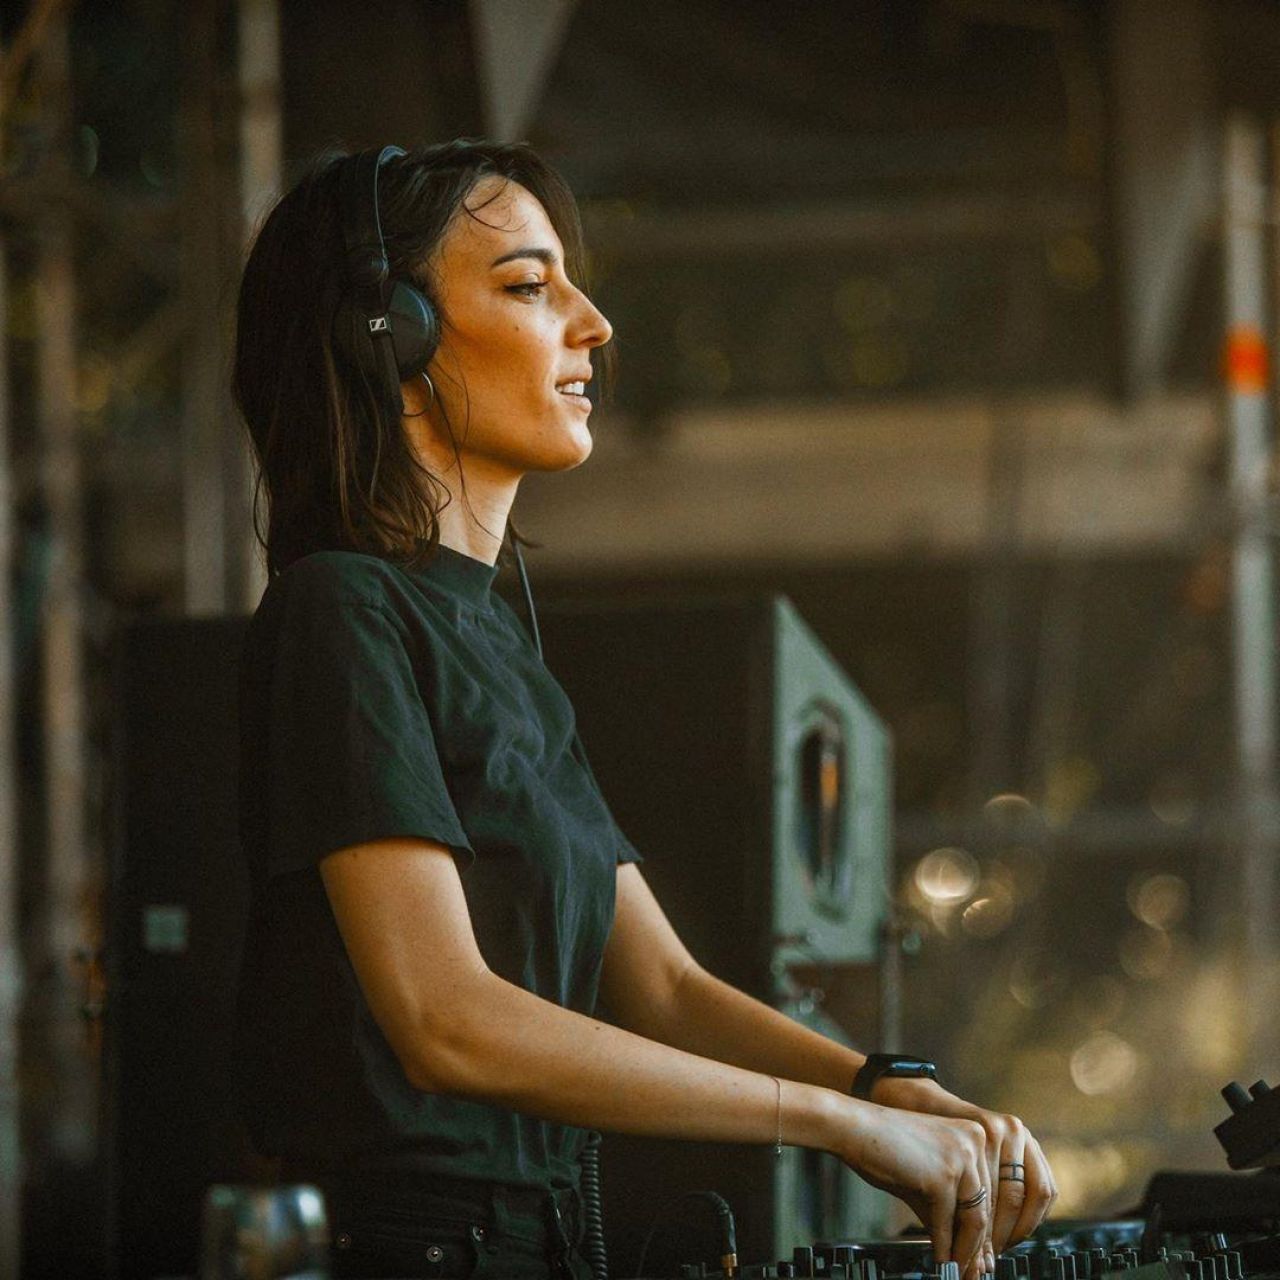 The audio headset is worn by Amelie Lens on his account Instagram @Amelie_l...